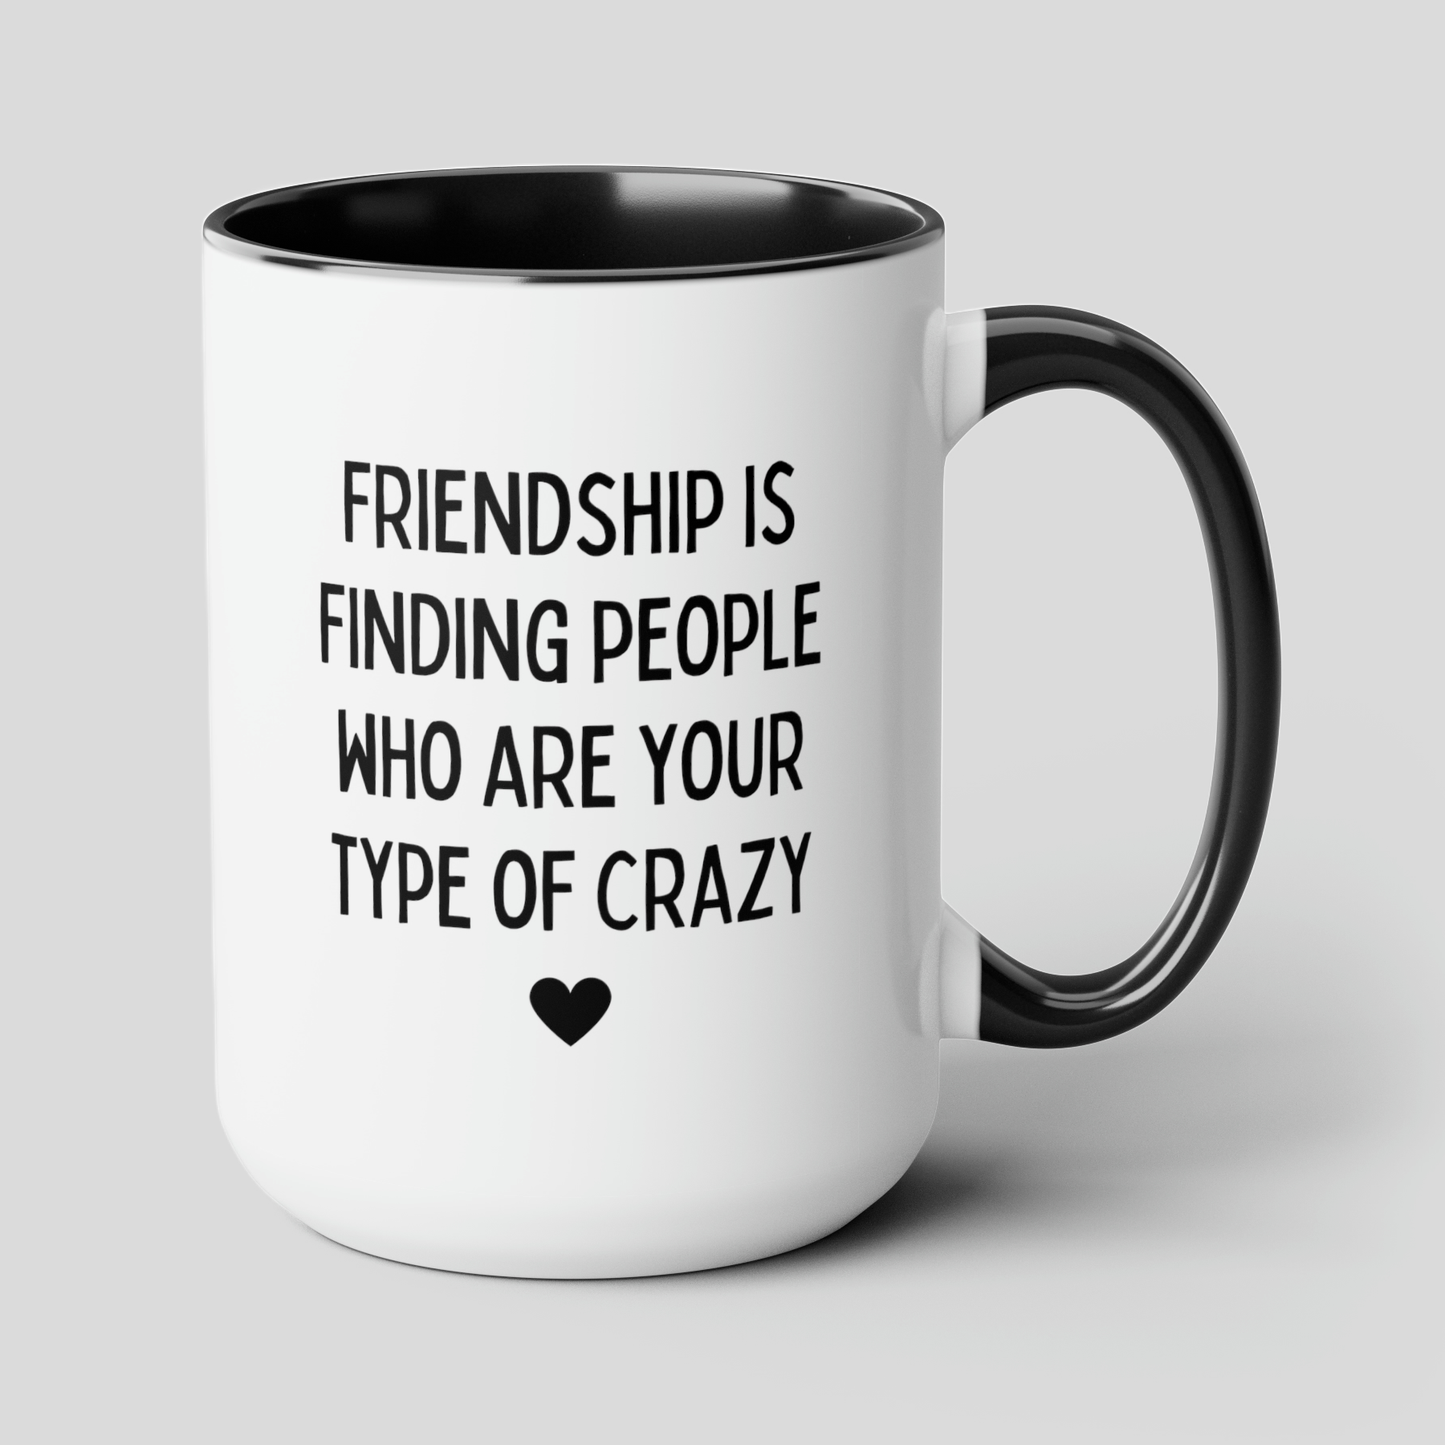 Friendship Is Finding People Who Are Your Type Of Crazy 15oz white with black accent funny large coffee mug gift for best friend friendship decor BFF Bestie tea cup waveywares wavey wares wavywares wavy wares cover